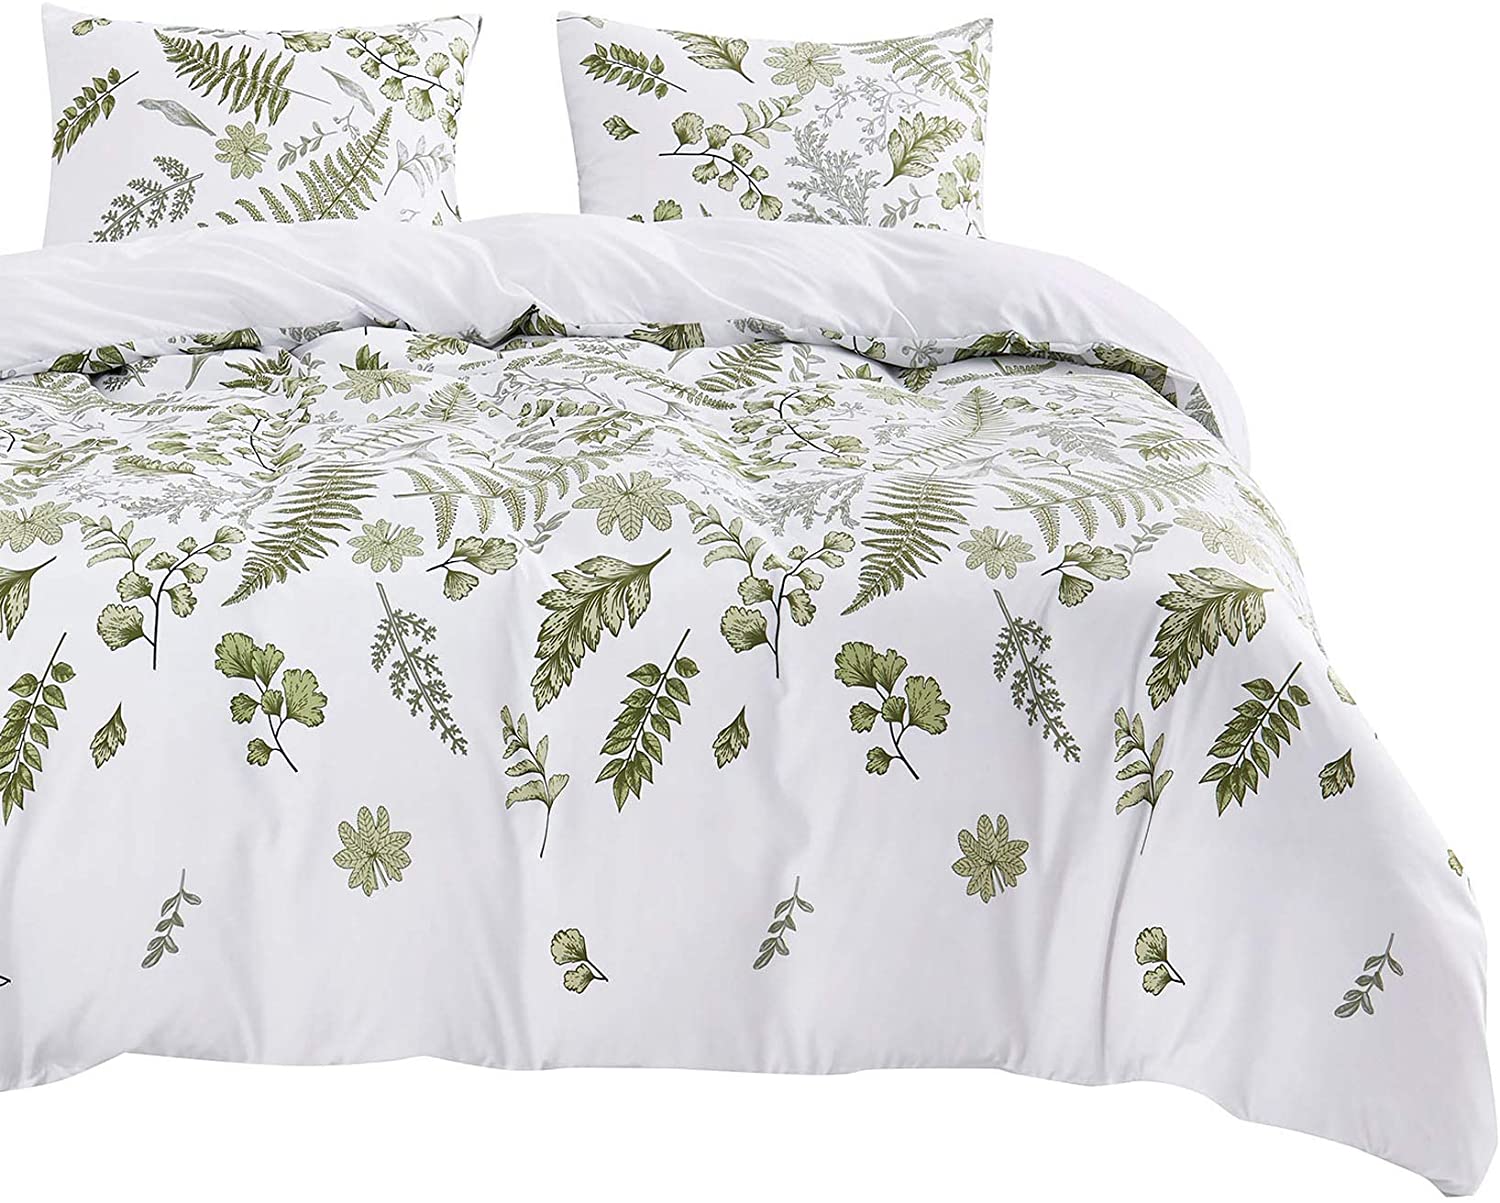 Wake In Cloud Botanical Floral Green Garden Leaves Pattern Printed on White 3pcs, King Size Duvet Cover Set King with Zipper Closure 100% Soft Cotton Bedding